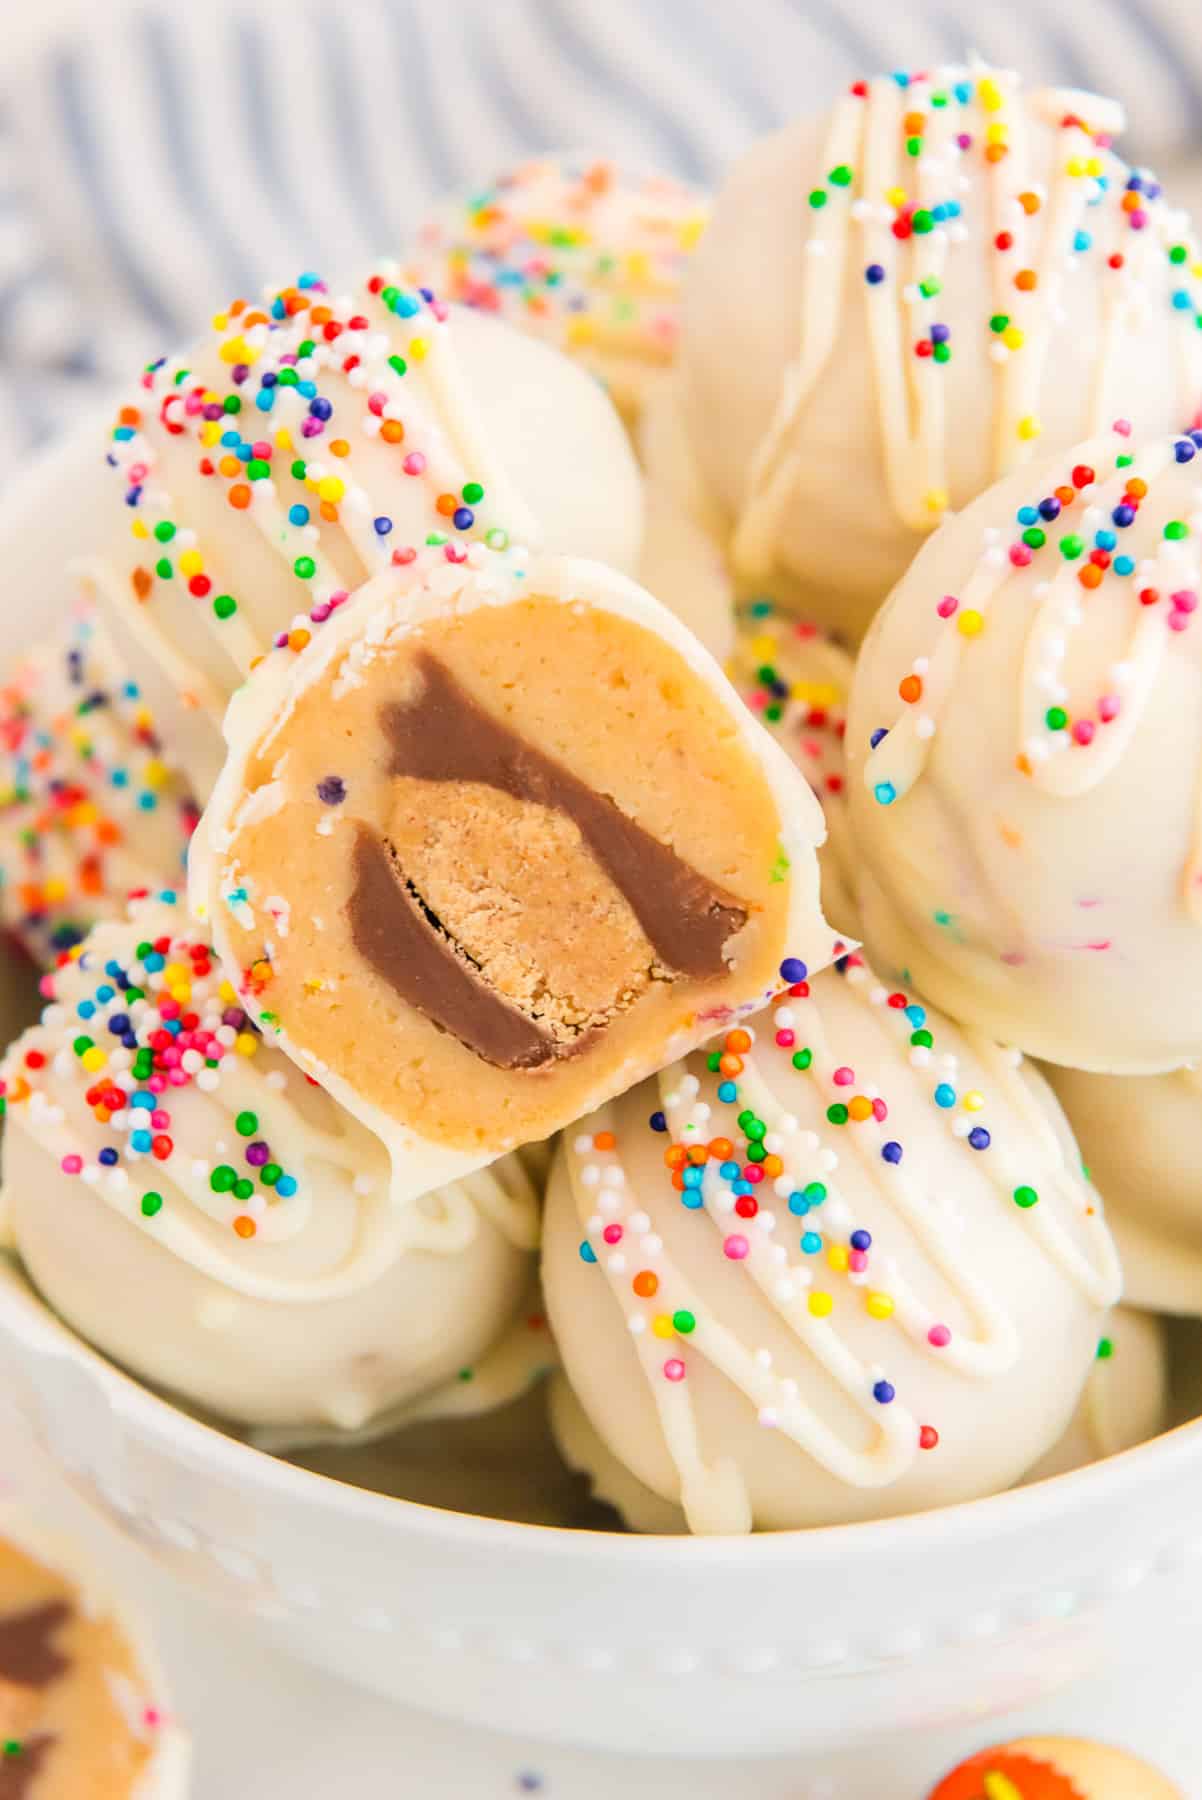 A bowl filled with white chocolate peanut butter balls with one showing the peanut butter cup inside and topped with sprinkles.